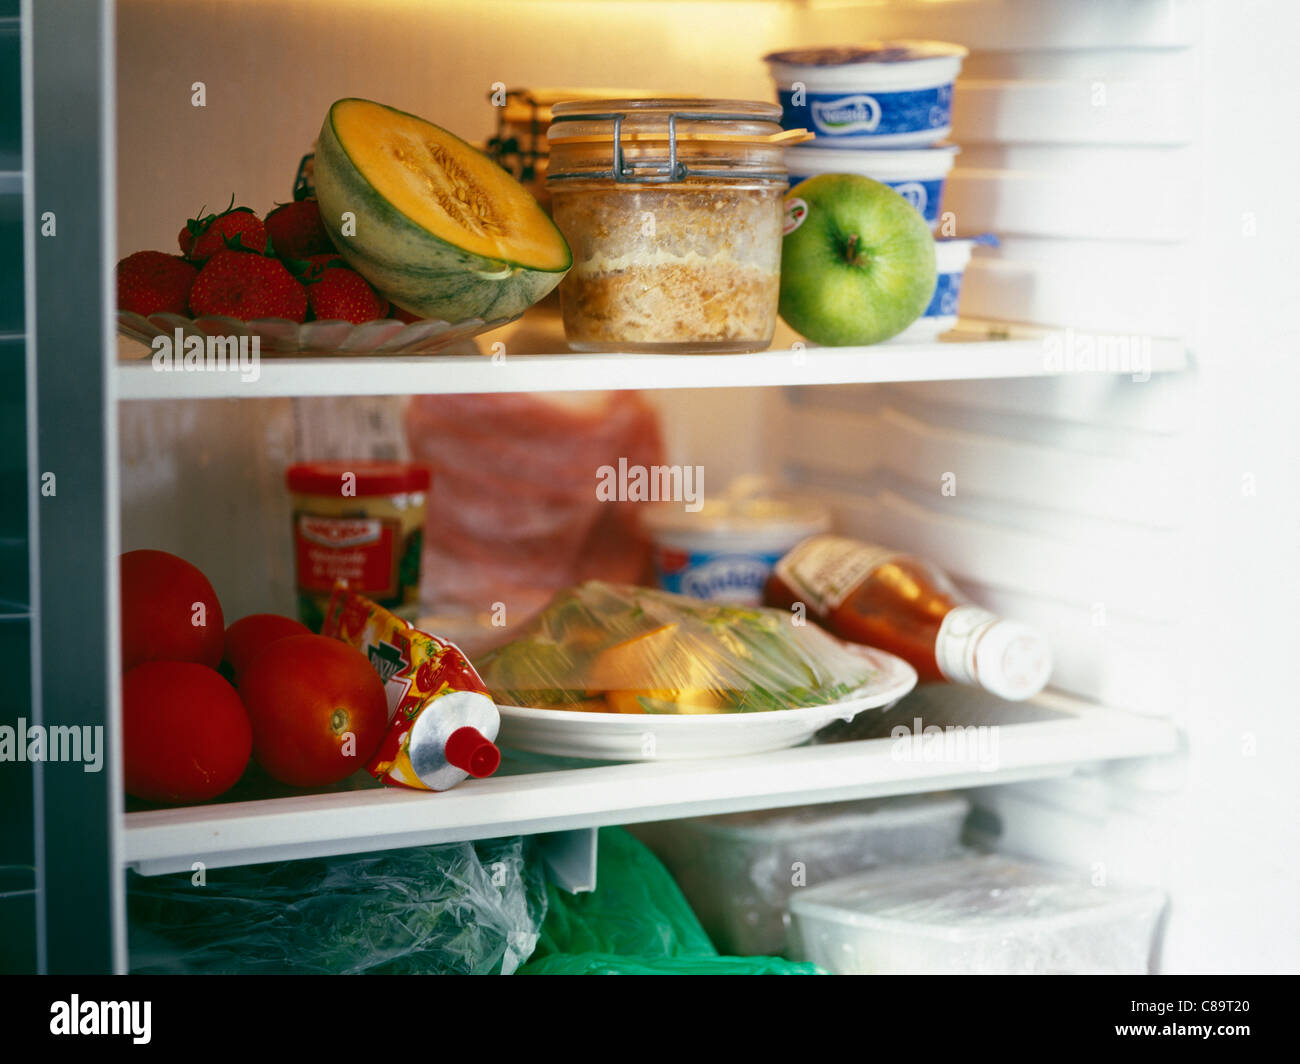 A refrigerator full of food Stock Photo